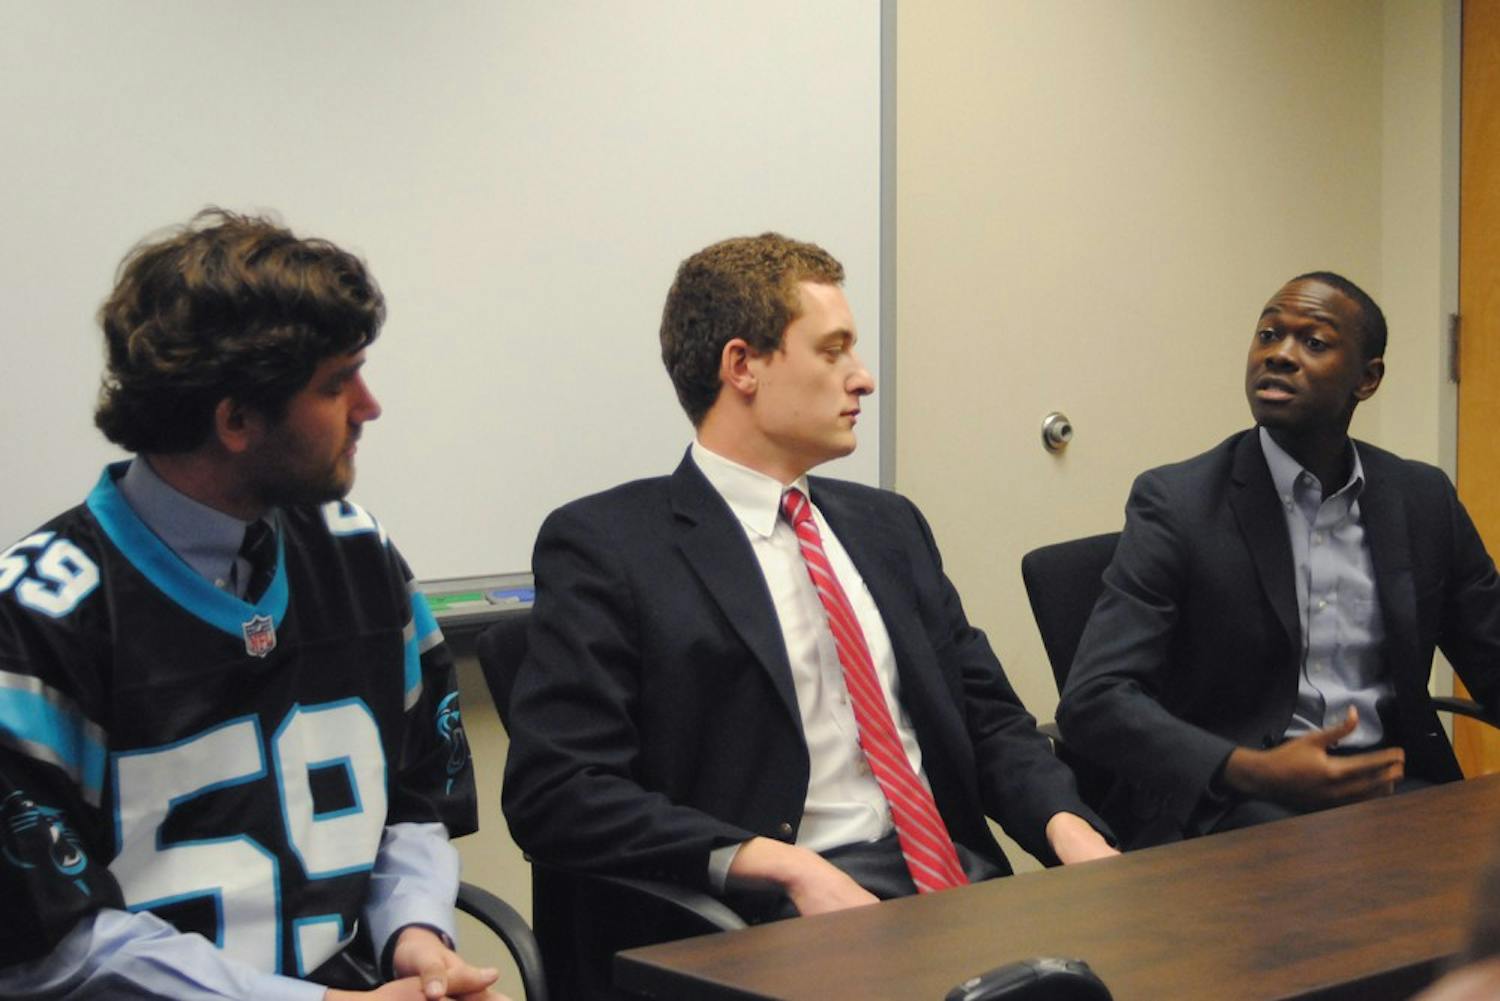 Wilson Sink (left), John Taylor (center) and Bradley Opere (right) pictured during the Daily Tar Heel's Student Body President Forum.